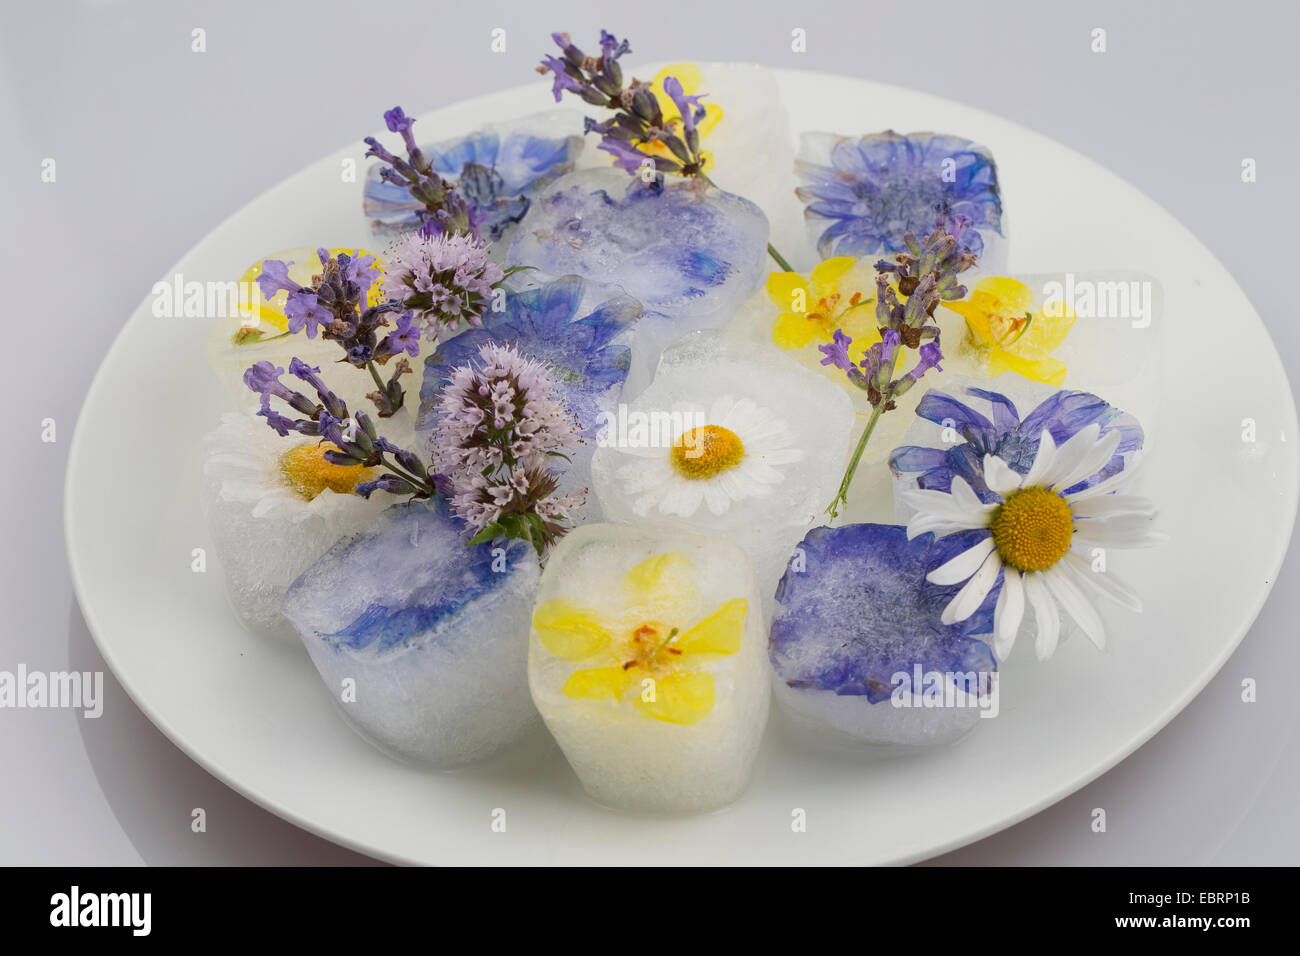 blossom ice cubes, flavoured with eatable blossoms Stock Photo